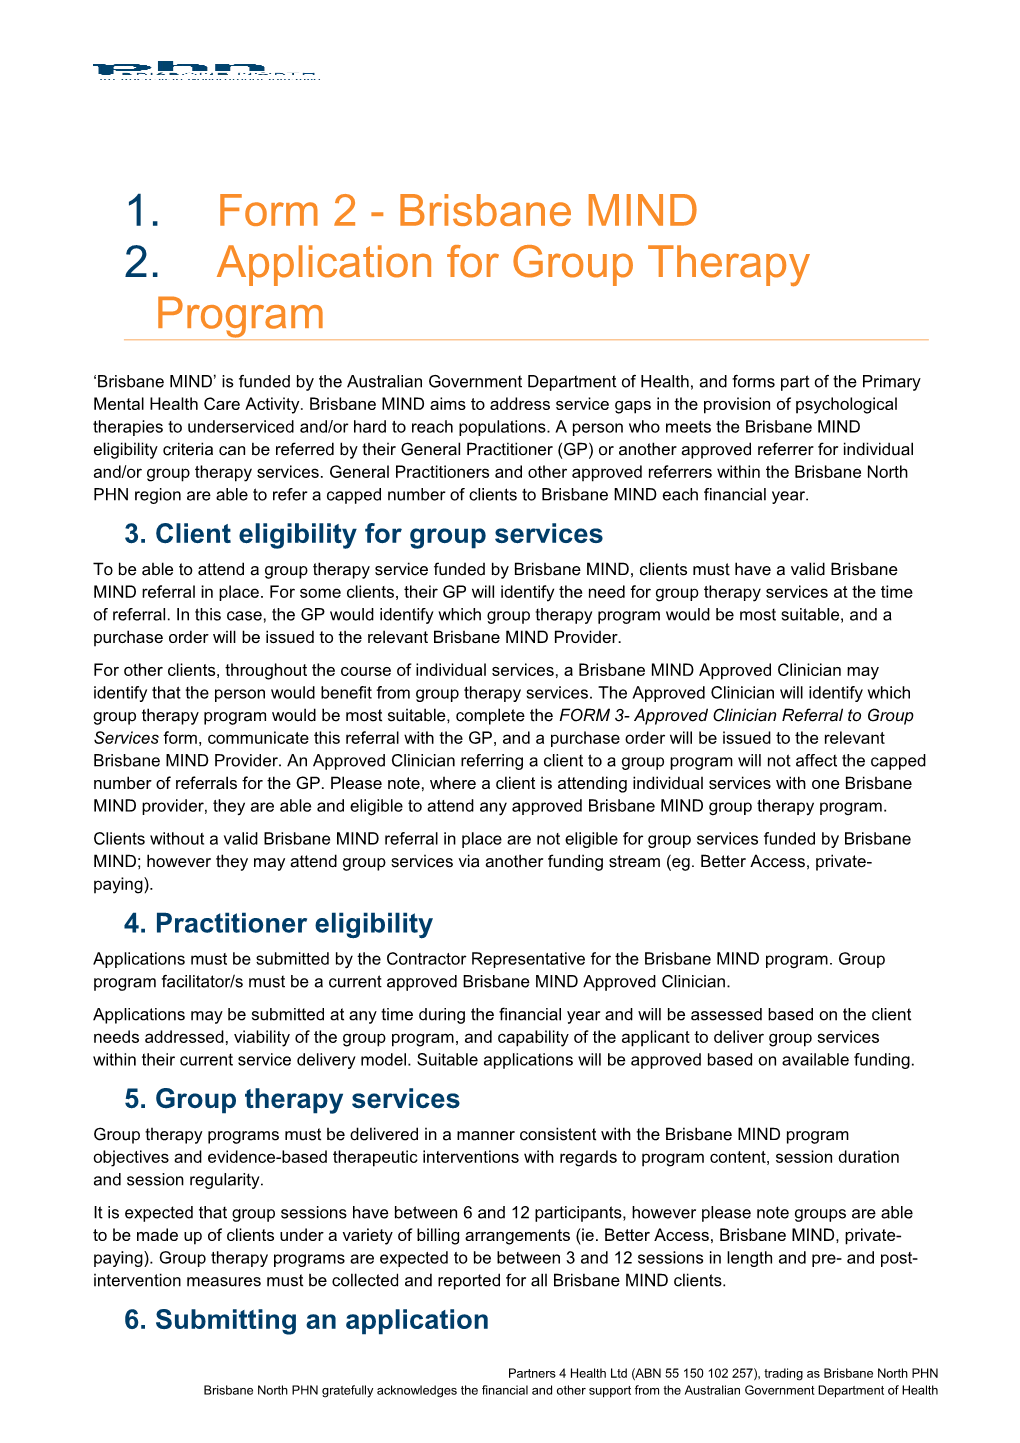 Application for Group Therapy Program